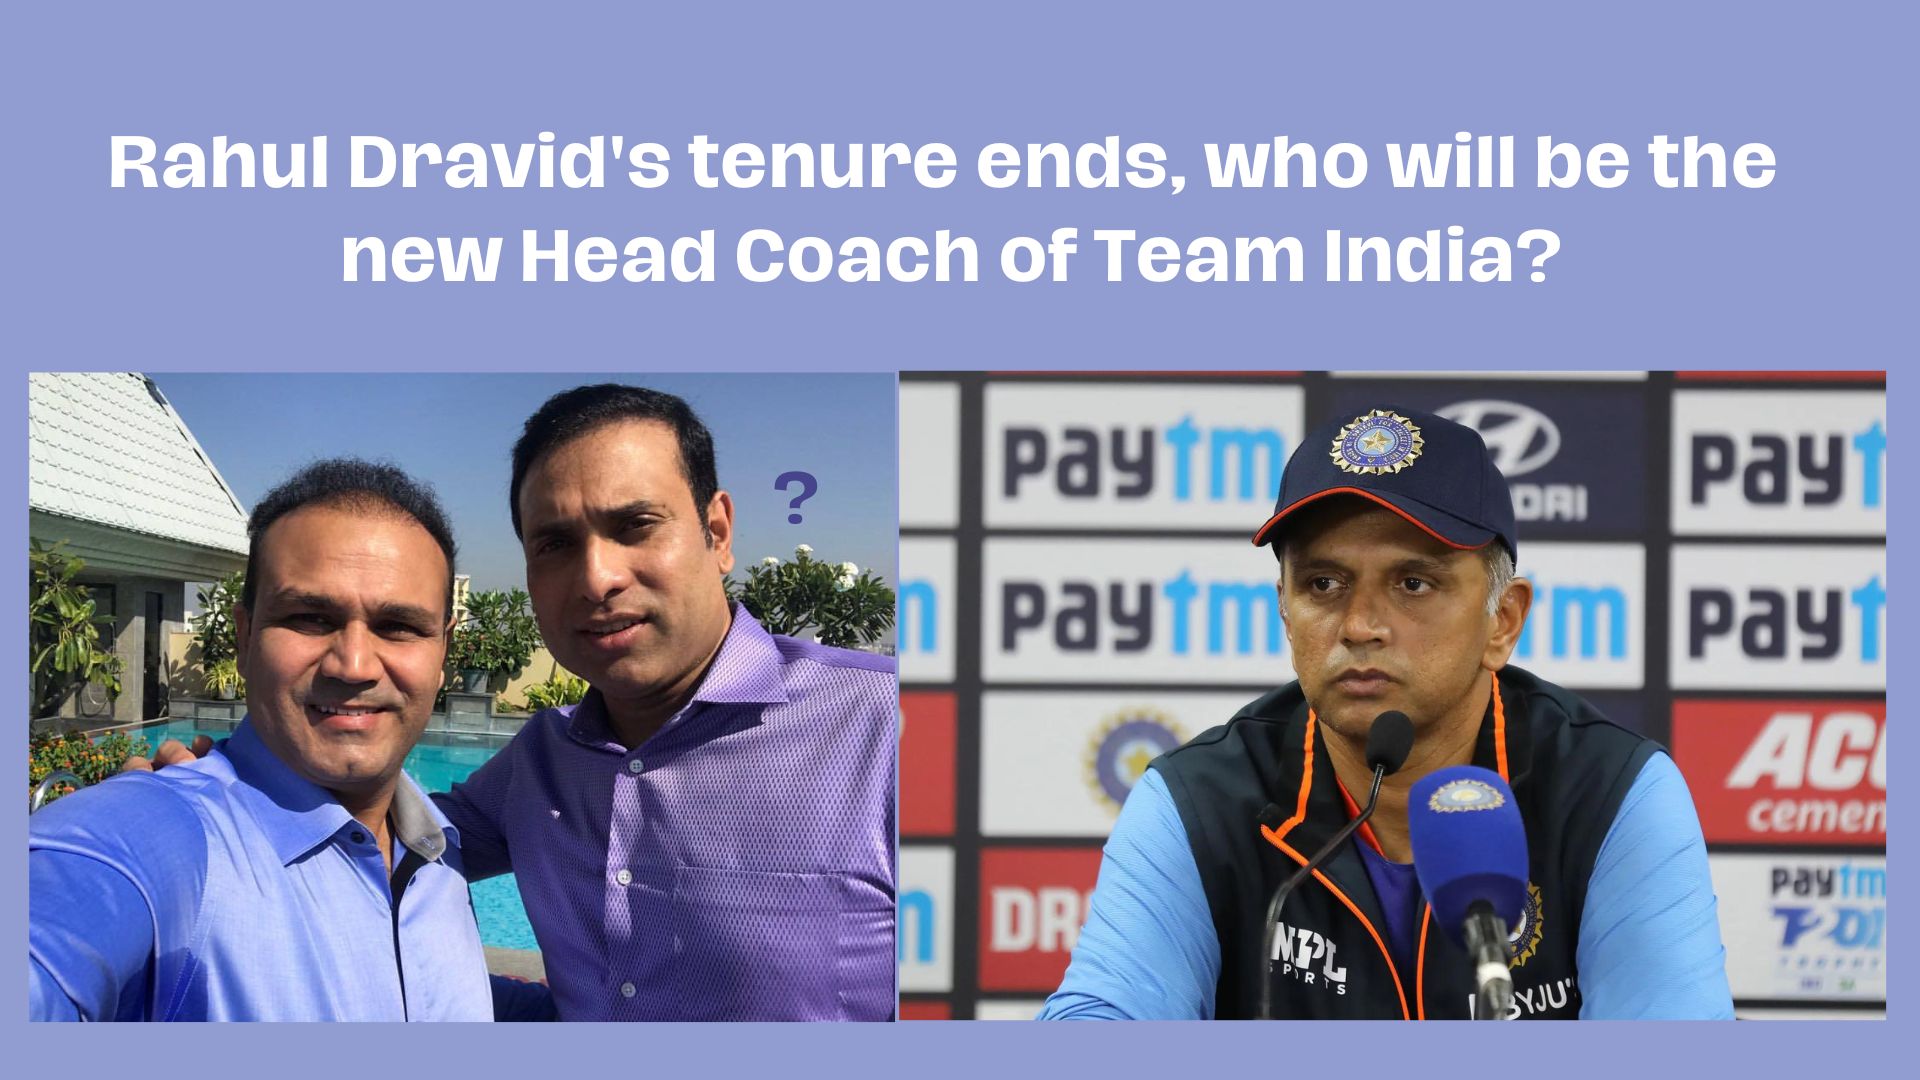 Rahul Dravid's tenure ends, who will be the new head coach of Team India